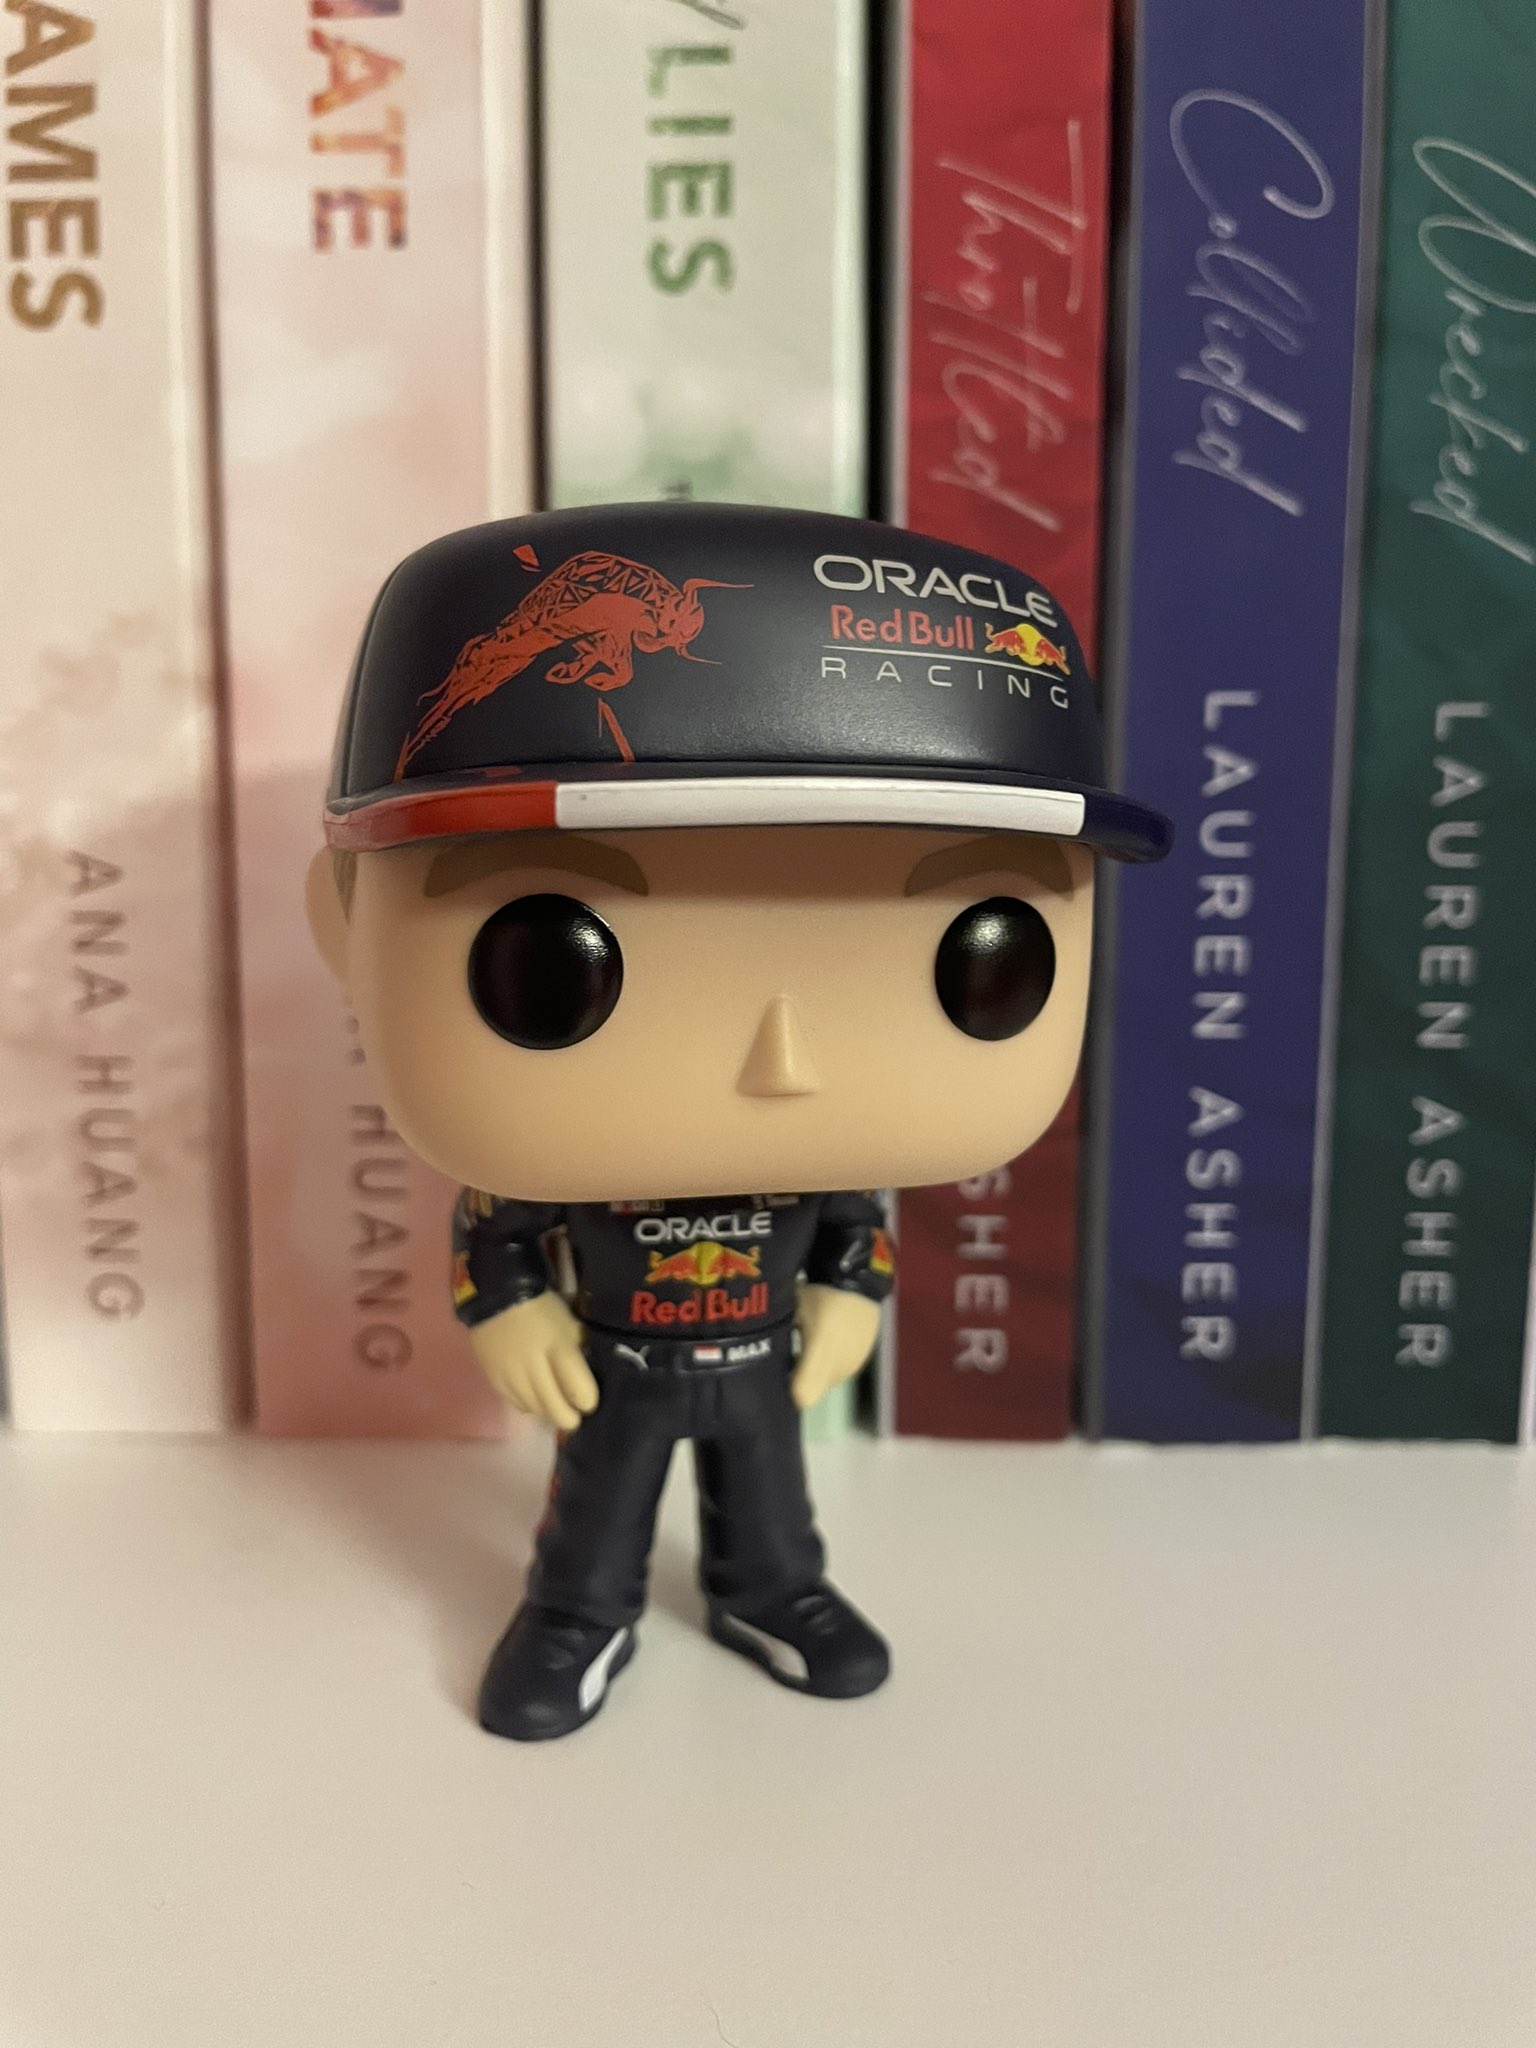 Ana 🦁 on X: Max Verstappen Funko is here 🩵